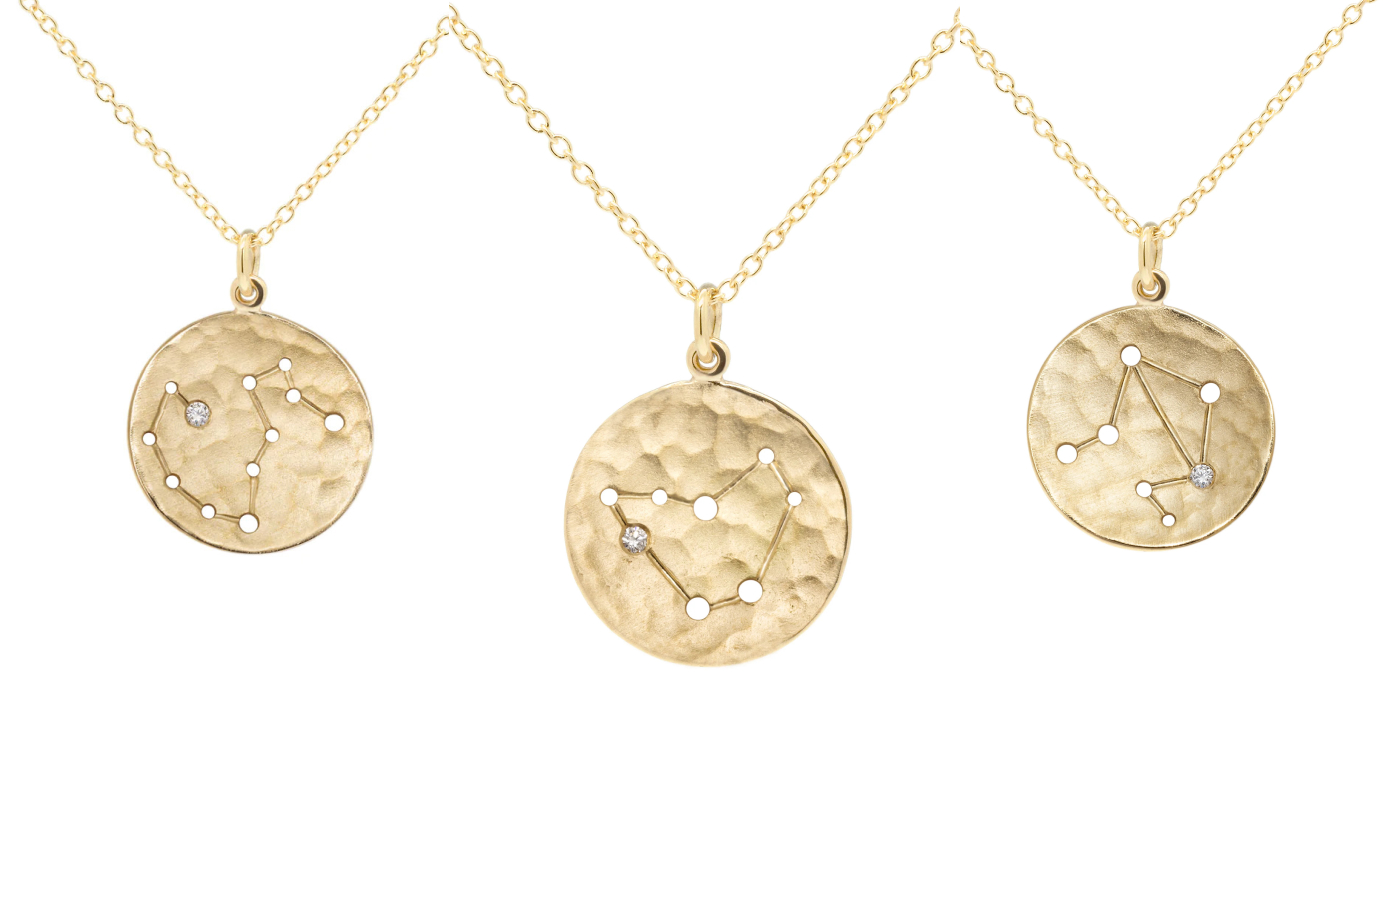 Anne Sportun Celestial Sign necklaces in gold and diamond